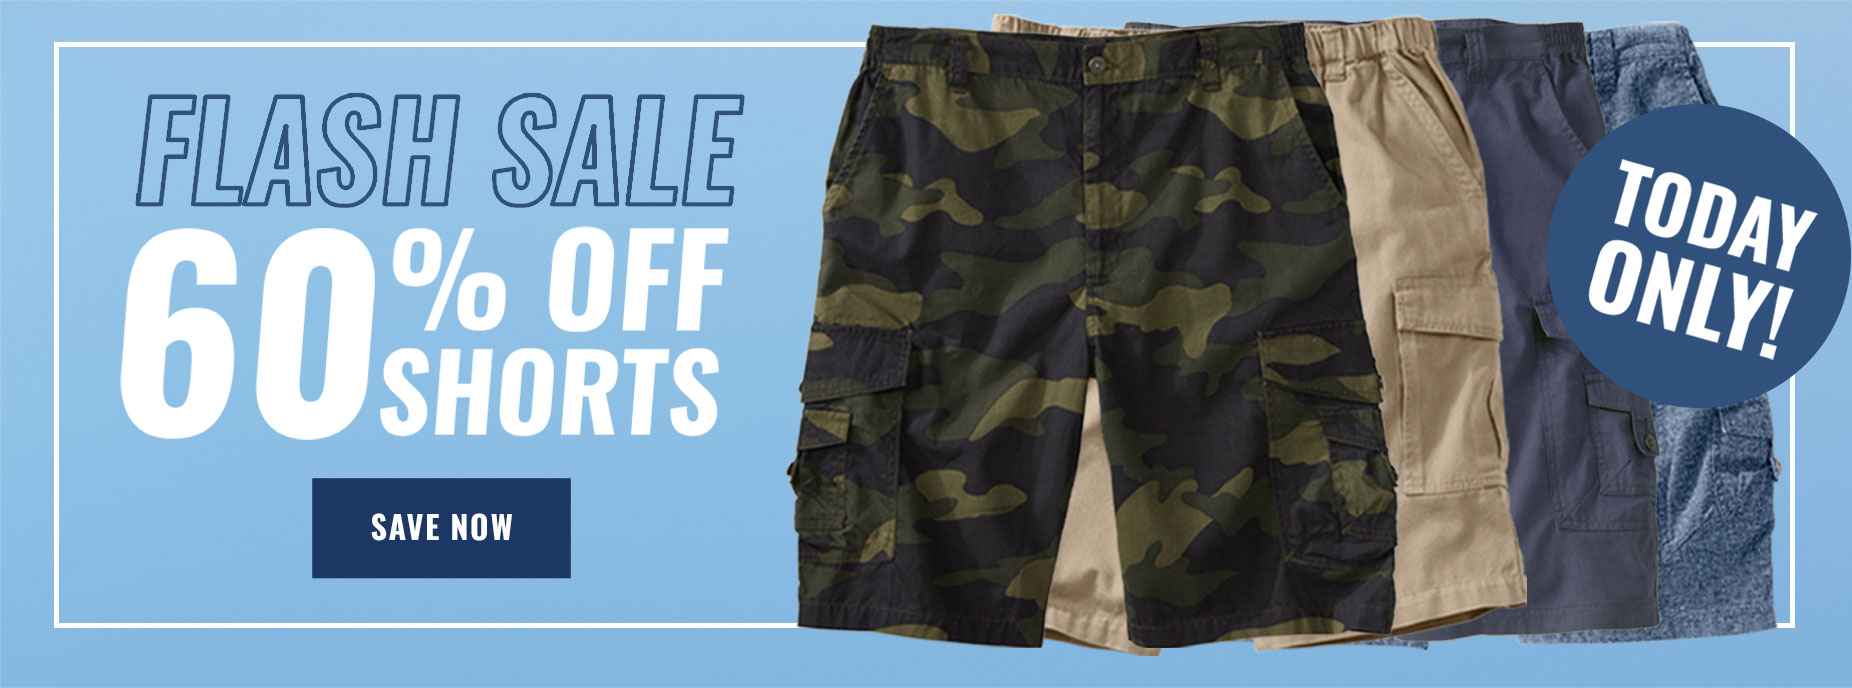 Flash Sale up to 60% off shorts